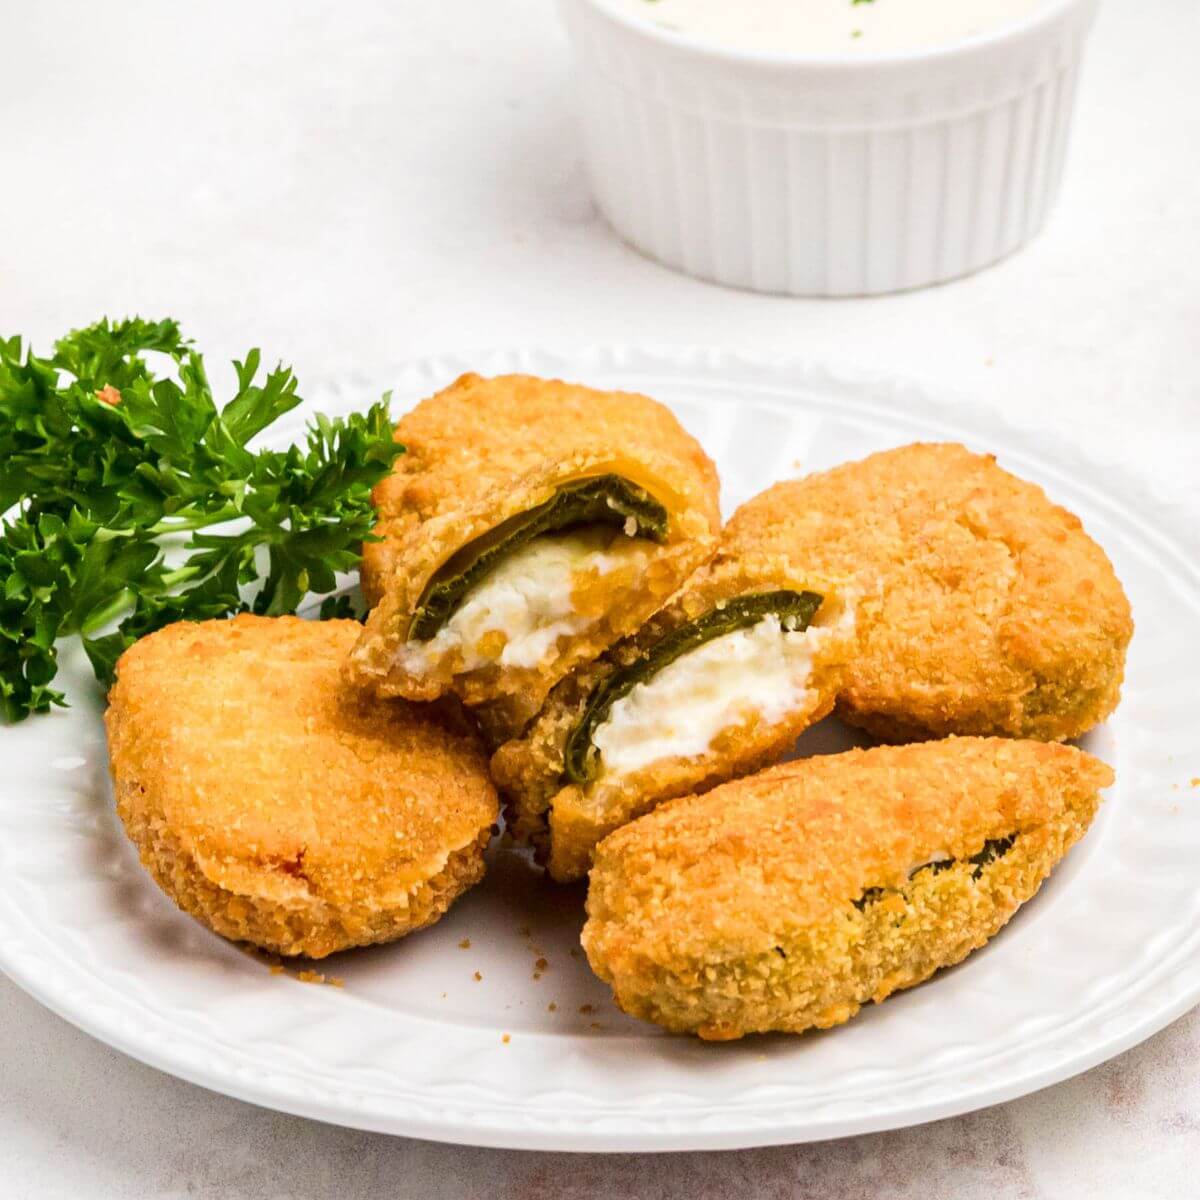 Golden crispy breaded jalapeno poppers on a small white plate.